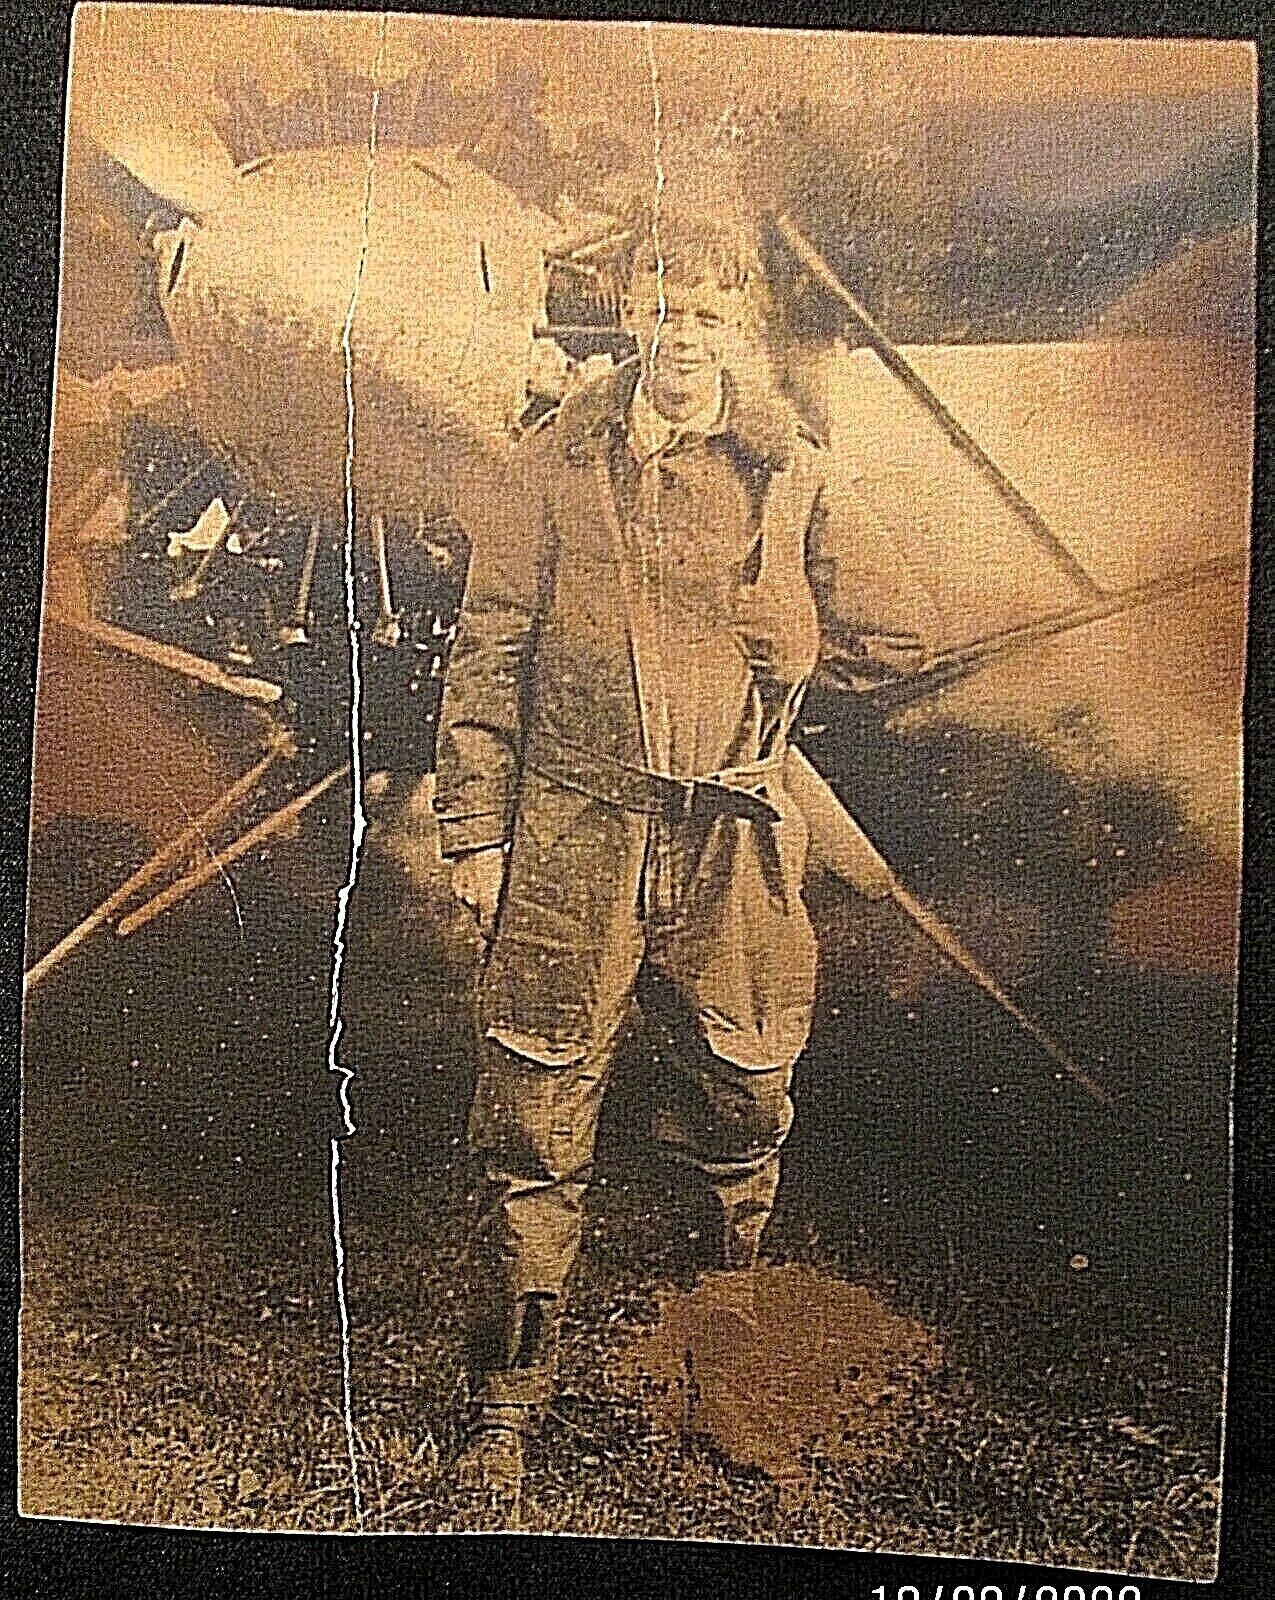 Primary image for CHARLES LINDBERGH{ RARE EARLY VINTAGE PHOTO) SELDOM SEEN PHOTO (CLASSSIC)